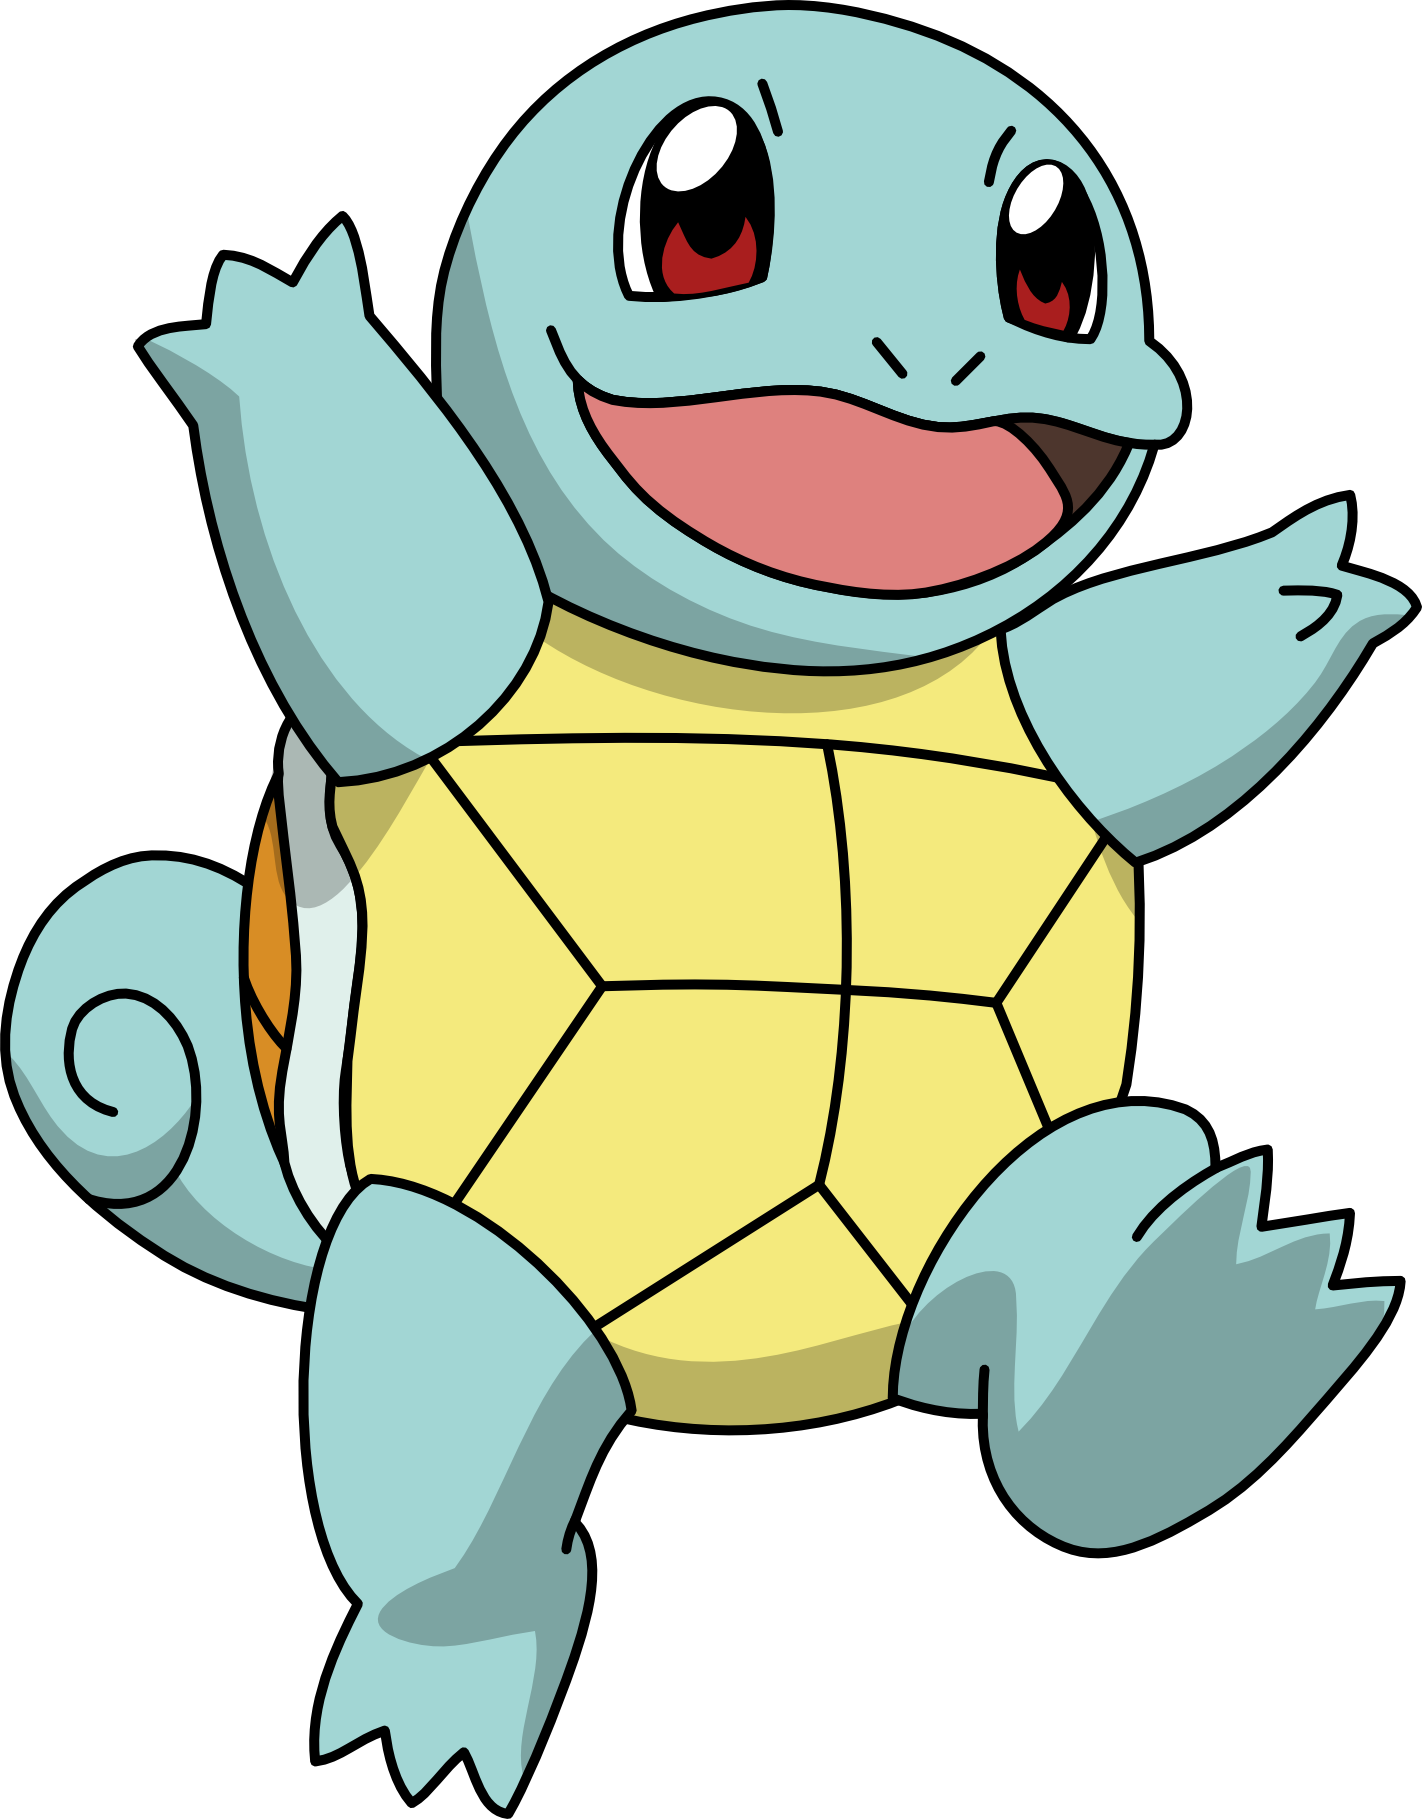 Squirtle PNG Image Background